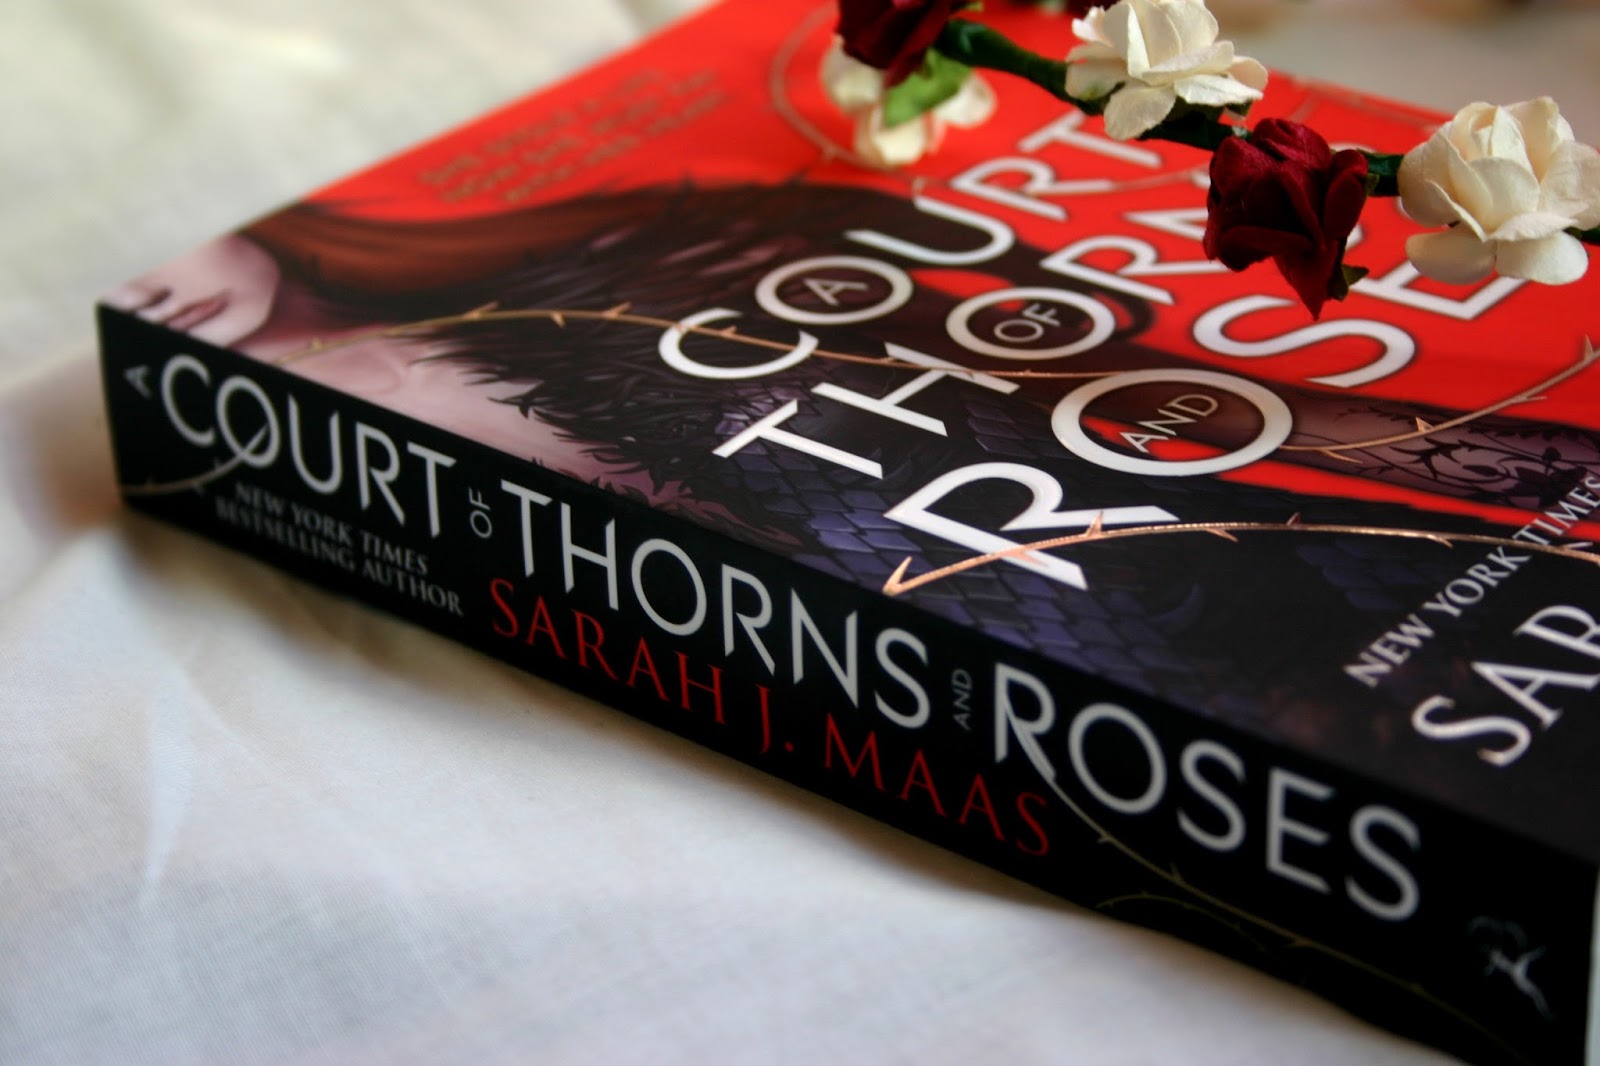 A Court of Thorns and Roses by Sarah J Maas Book Club Feature